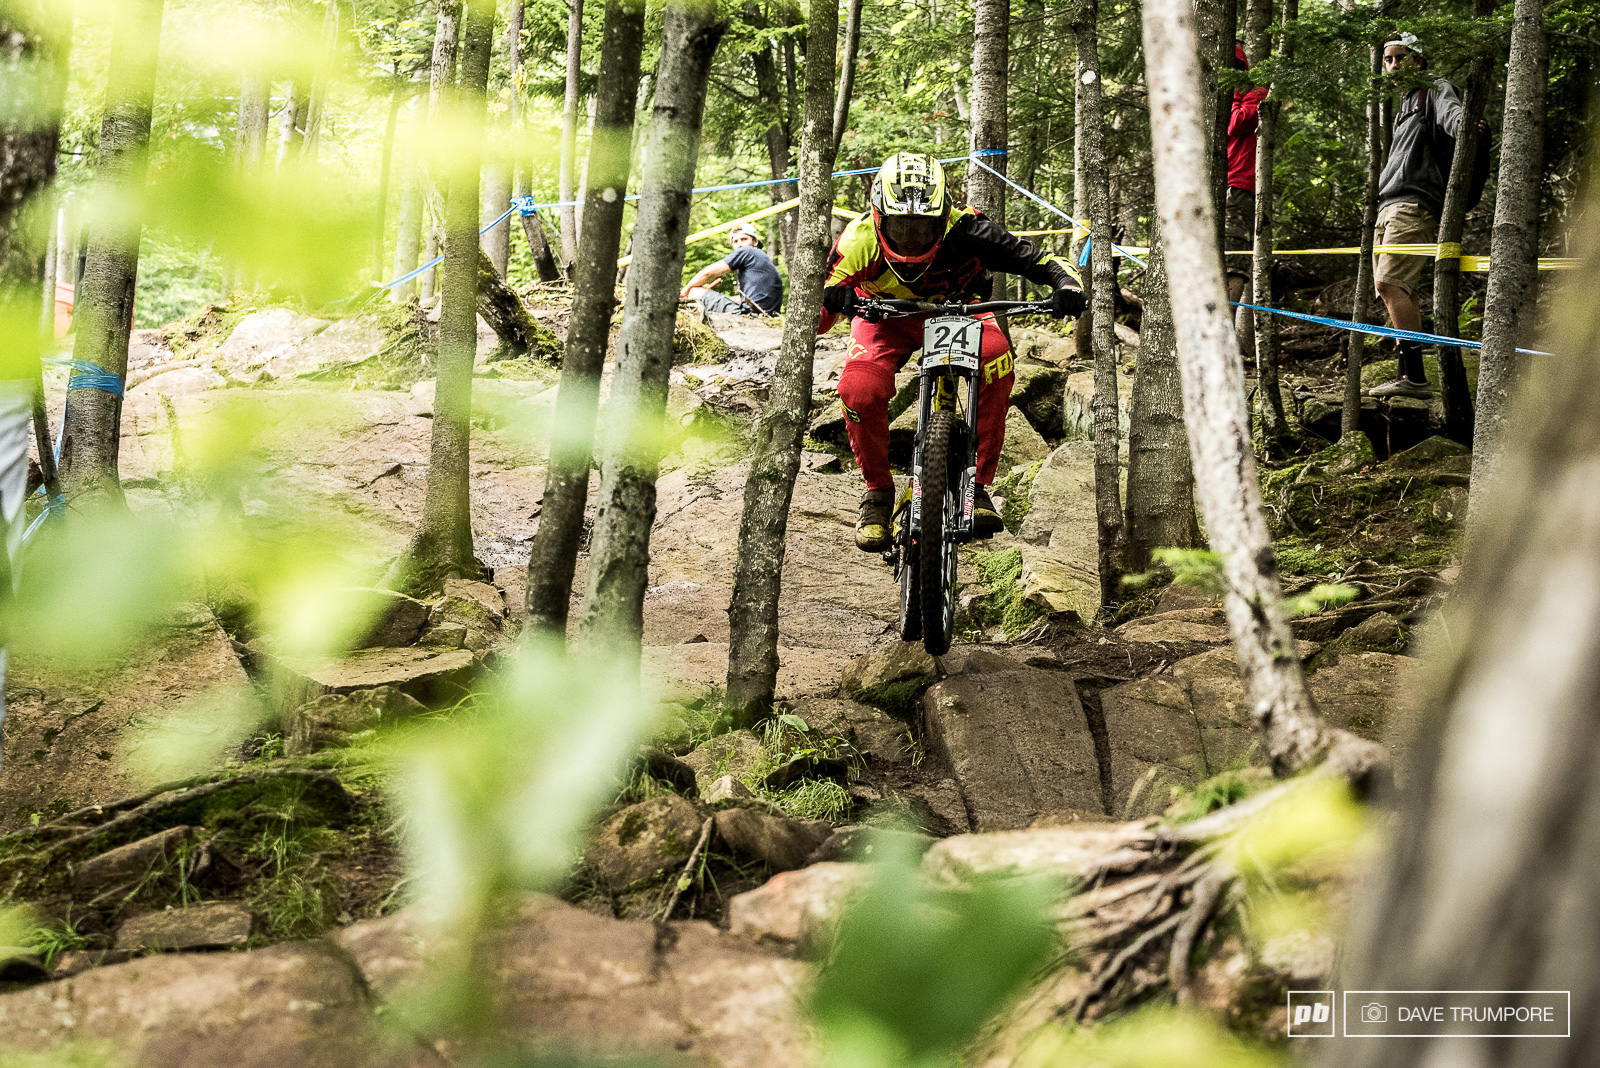 Mark Wallace had his best race ever to land 6th just 0.6 off the podium. No doubt his blistering pace through the rocks played a big roll for the young Canadian.